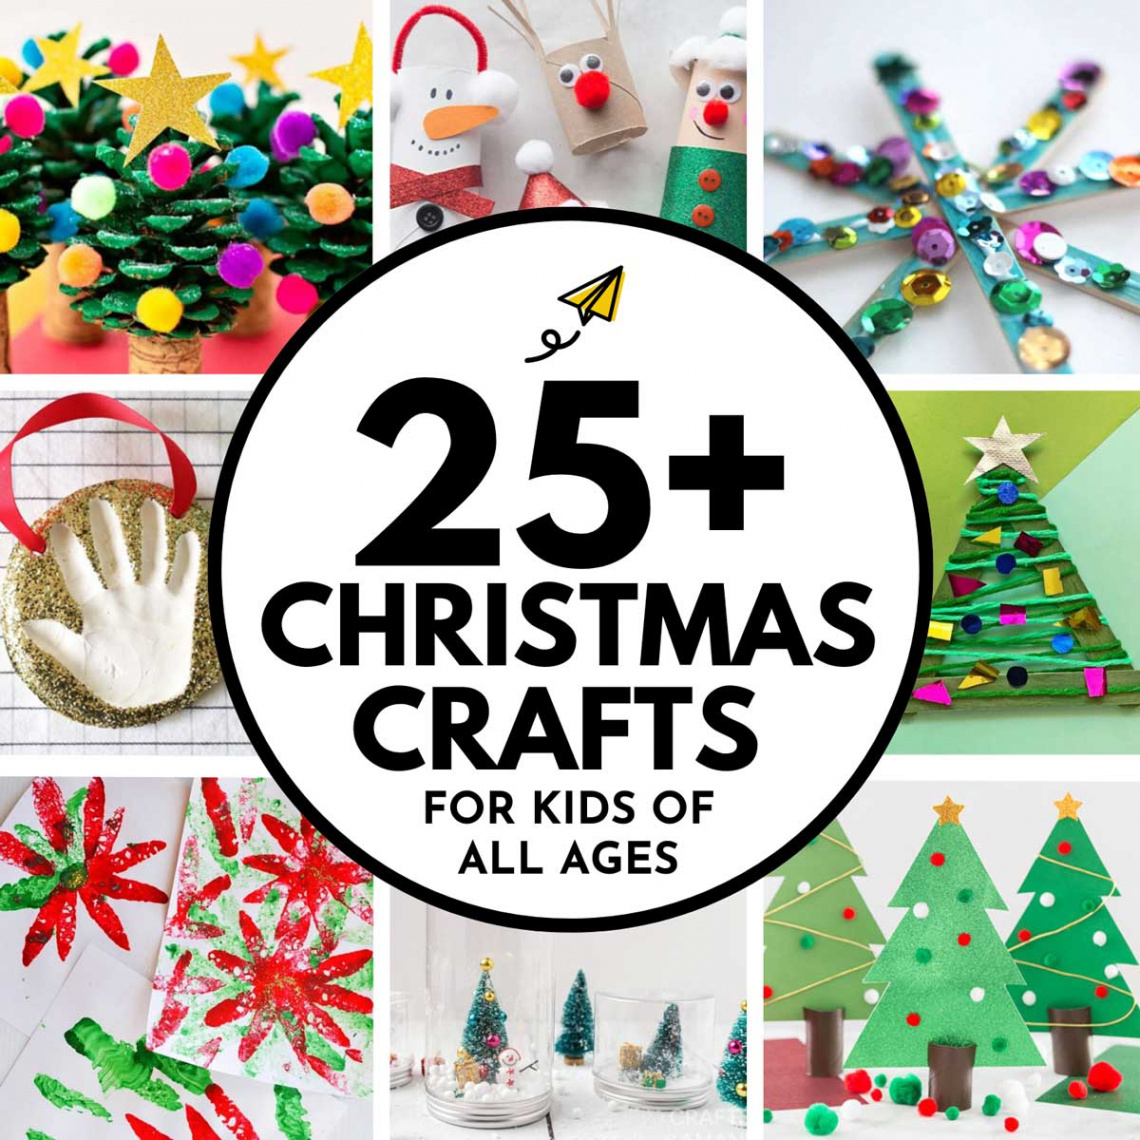 Christmas Crafts for Kids - Busy Toddler